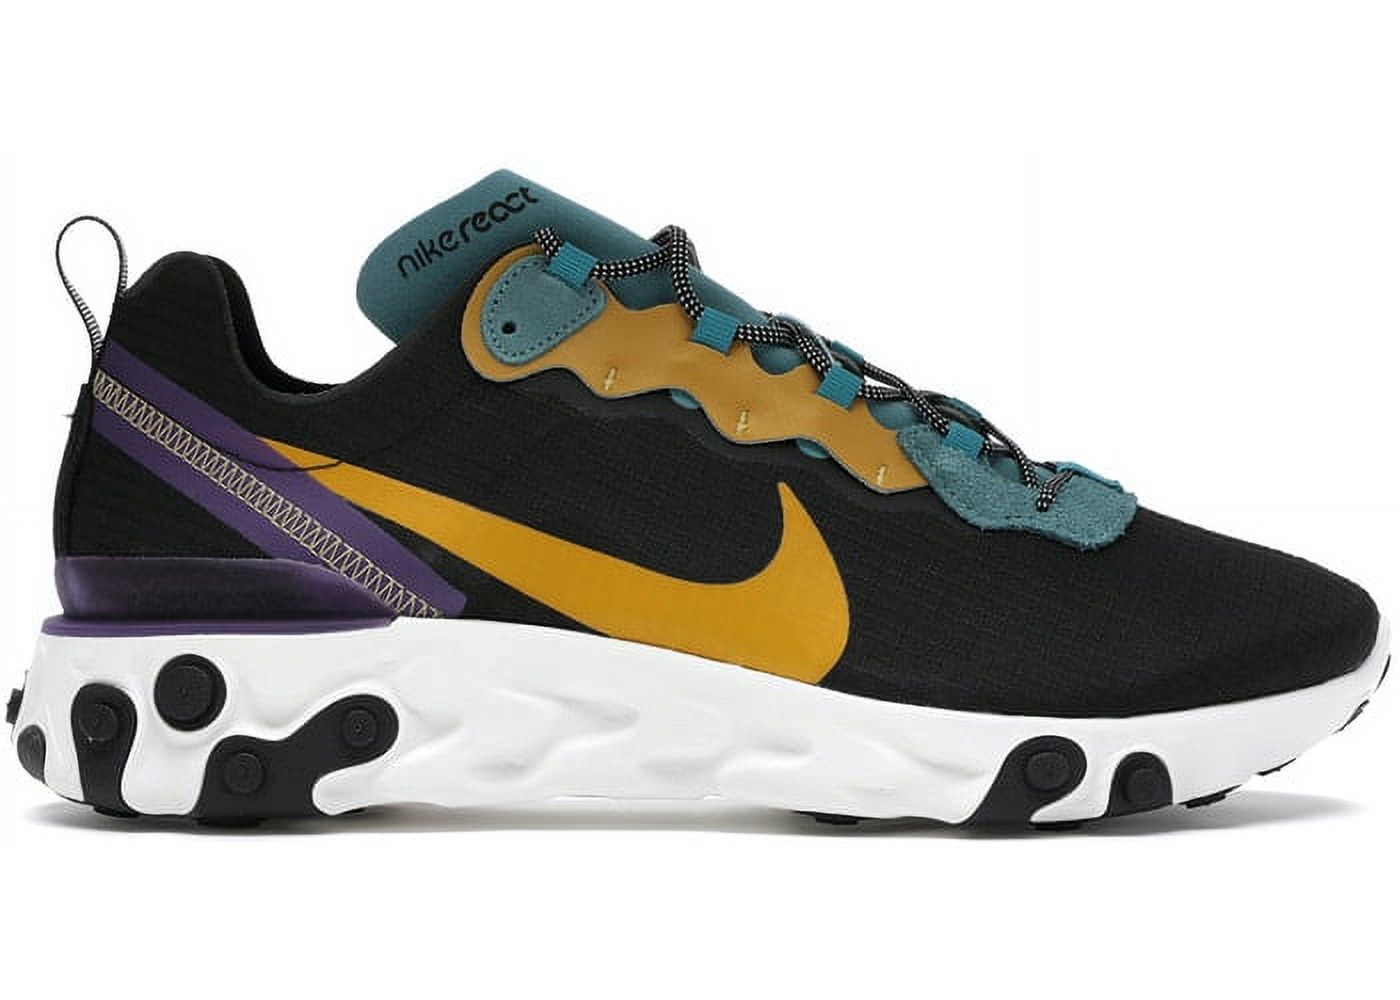 Nike Mens React Element 55 Premium Casual Running Shoes (9) - image 1 of 4